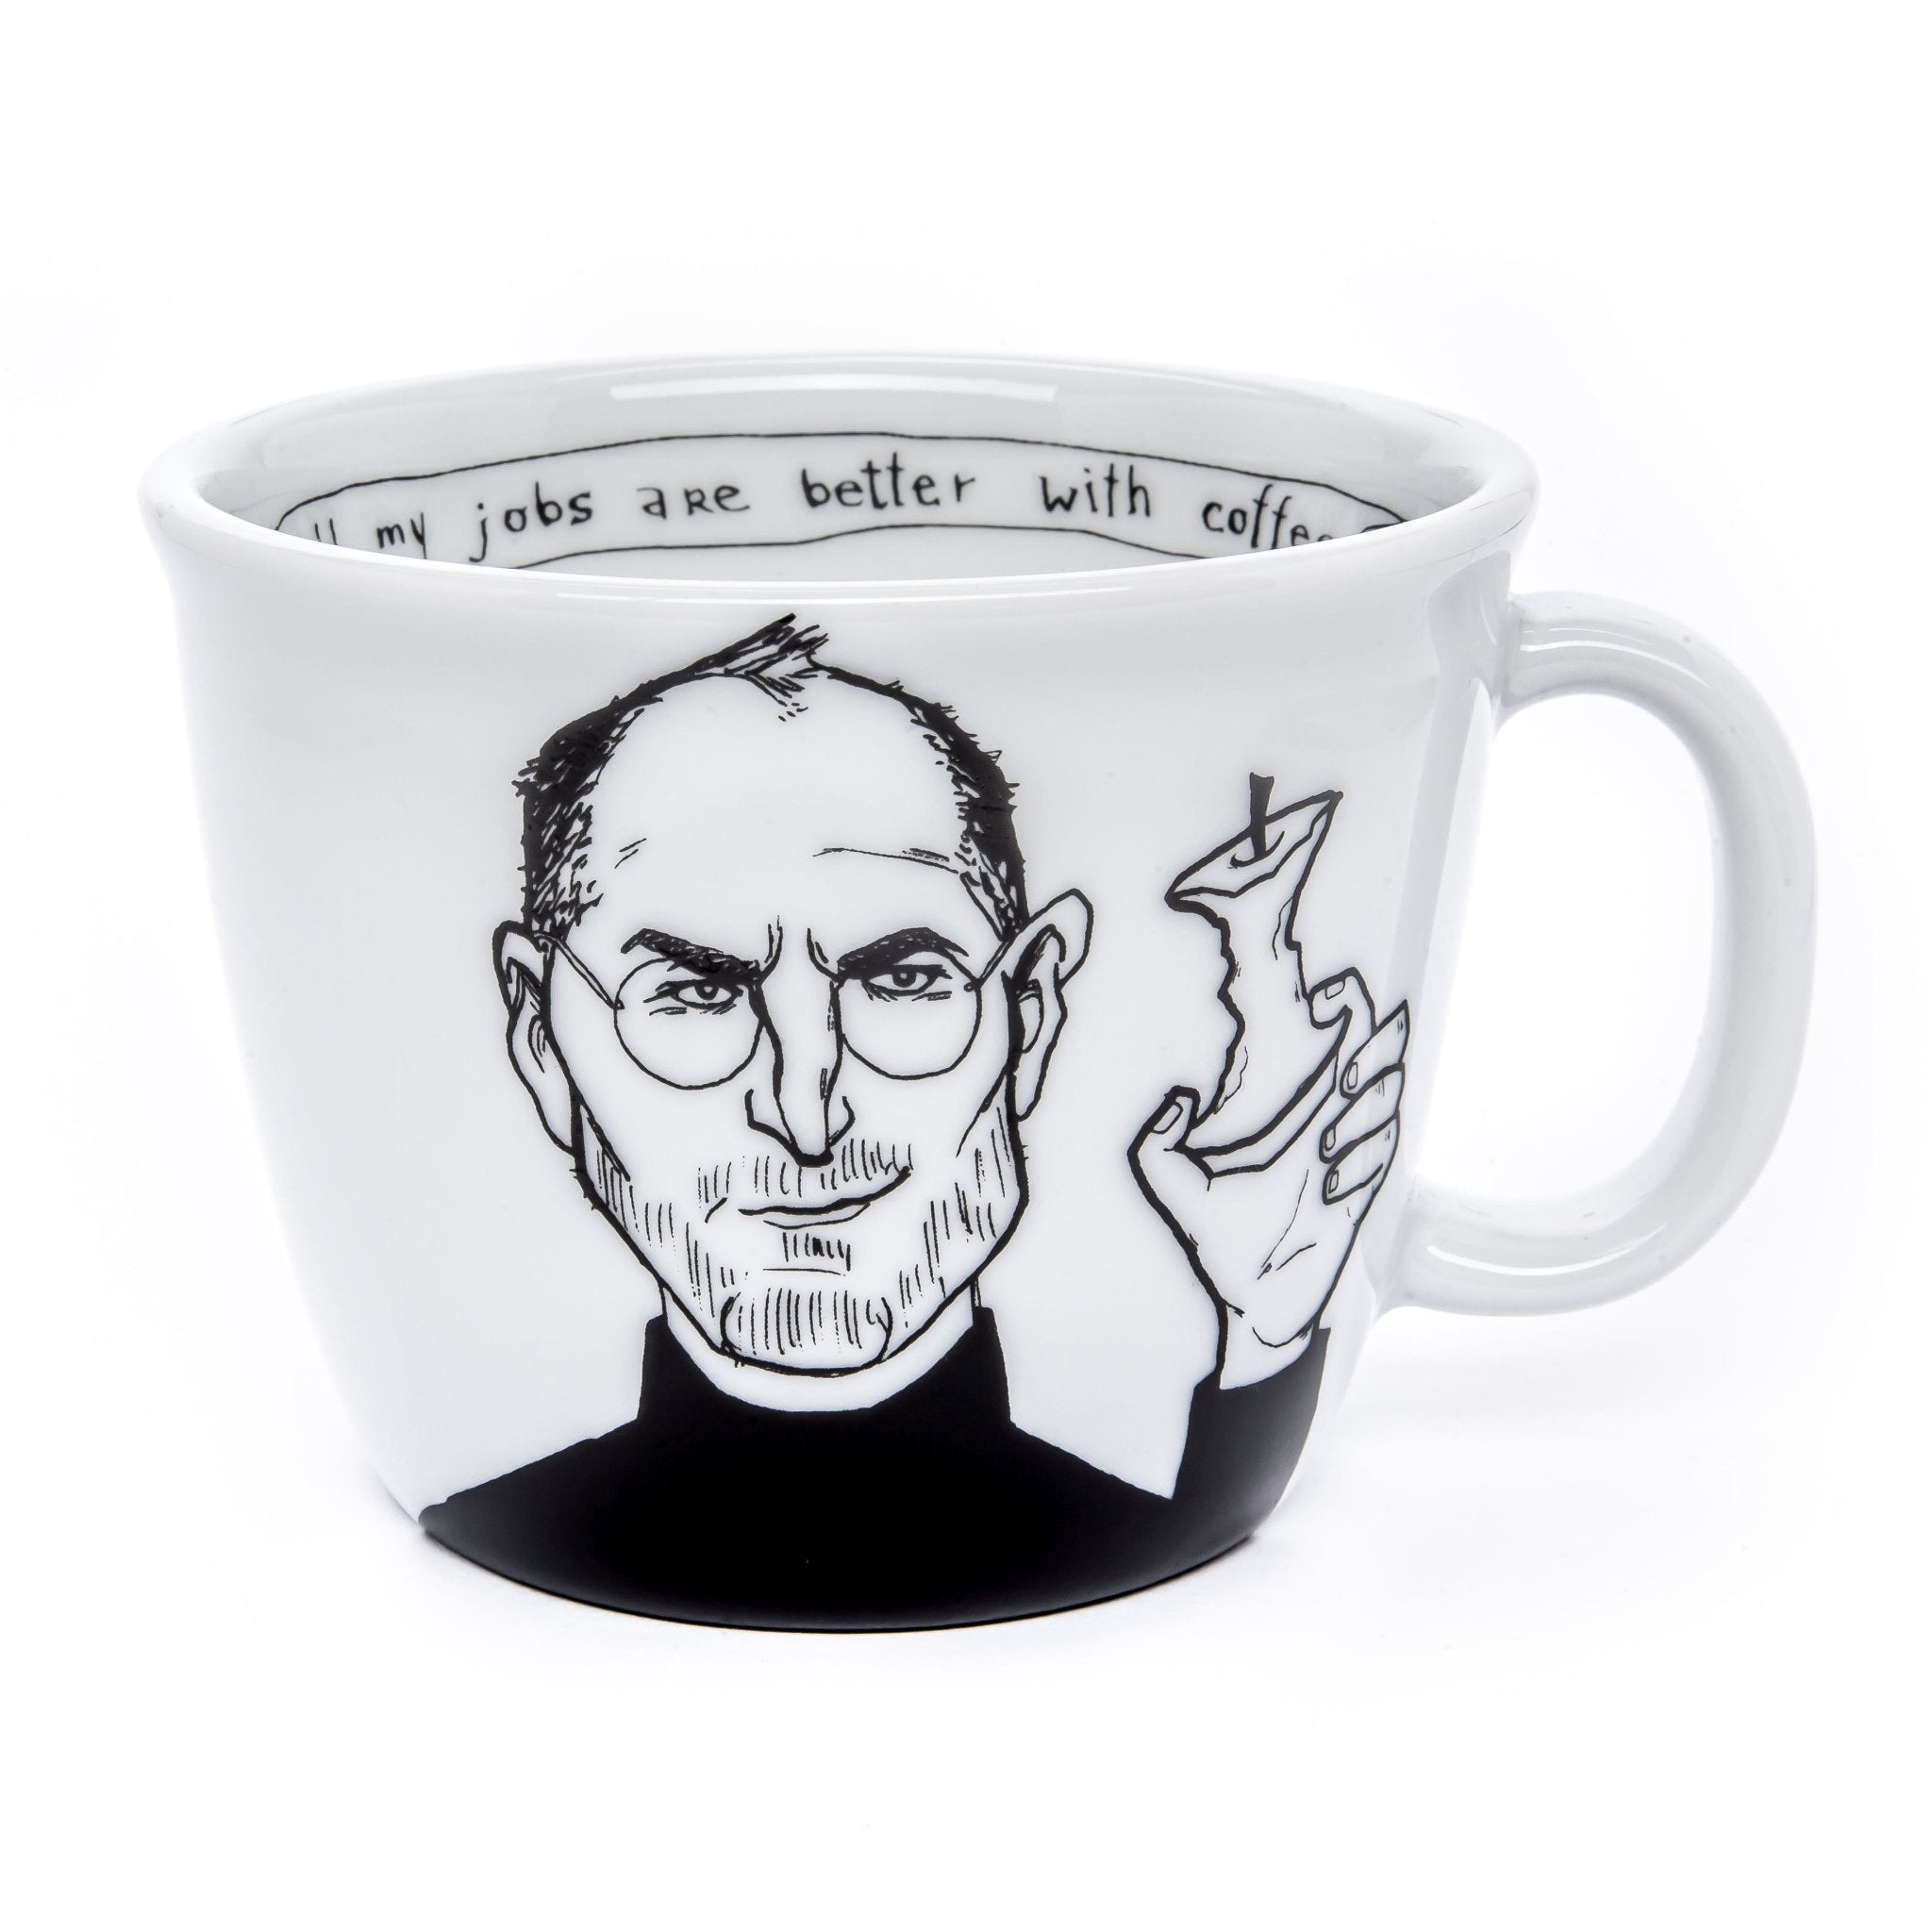 Porcelain cup inspired by Steve Jobs